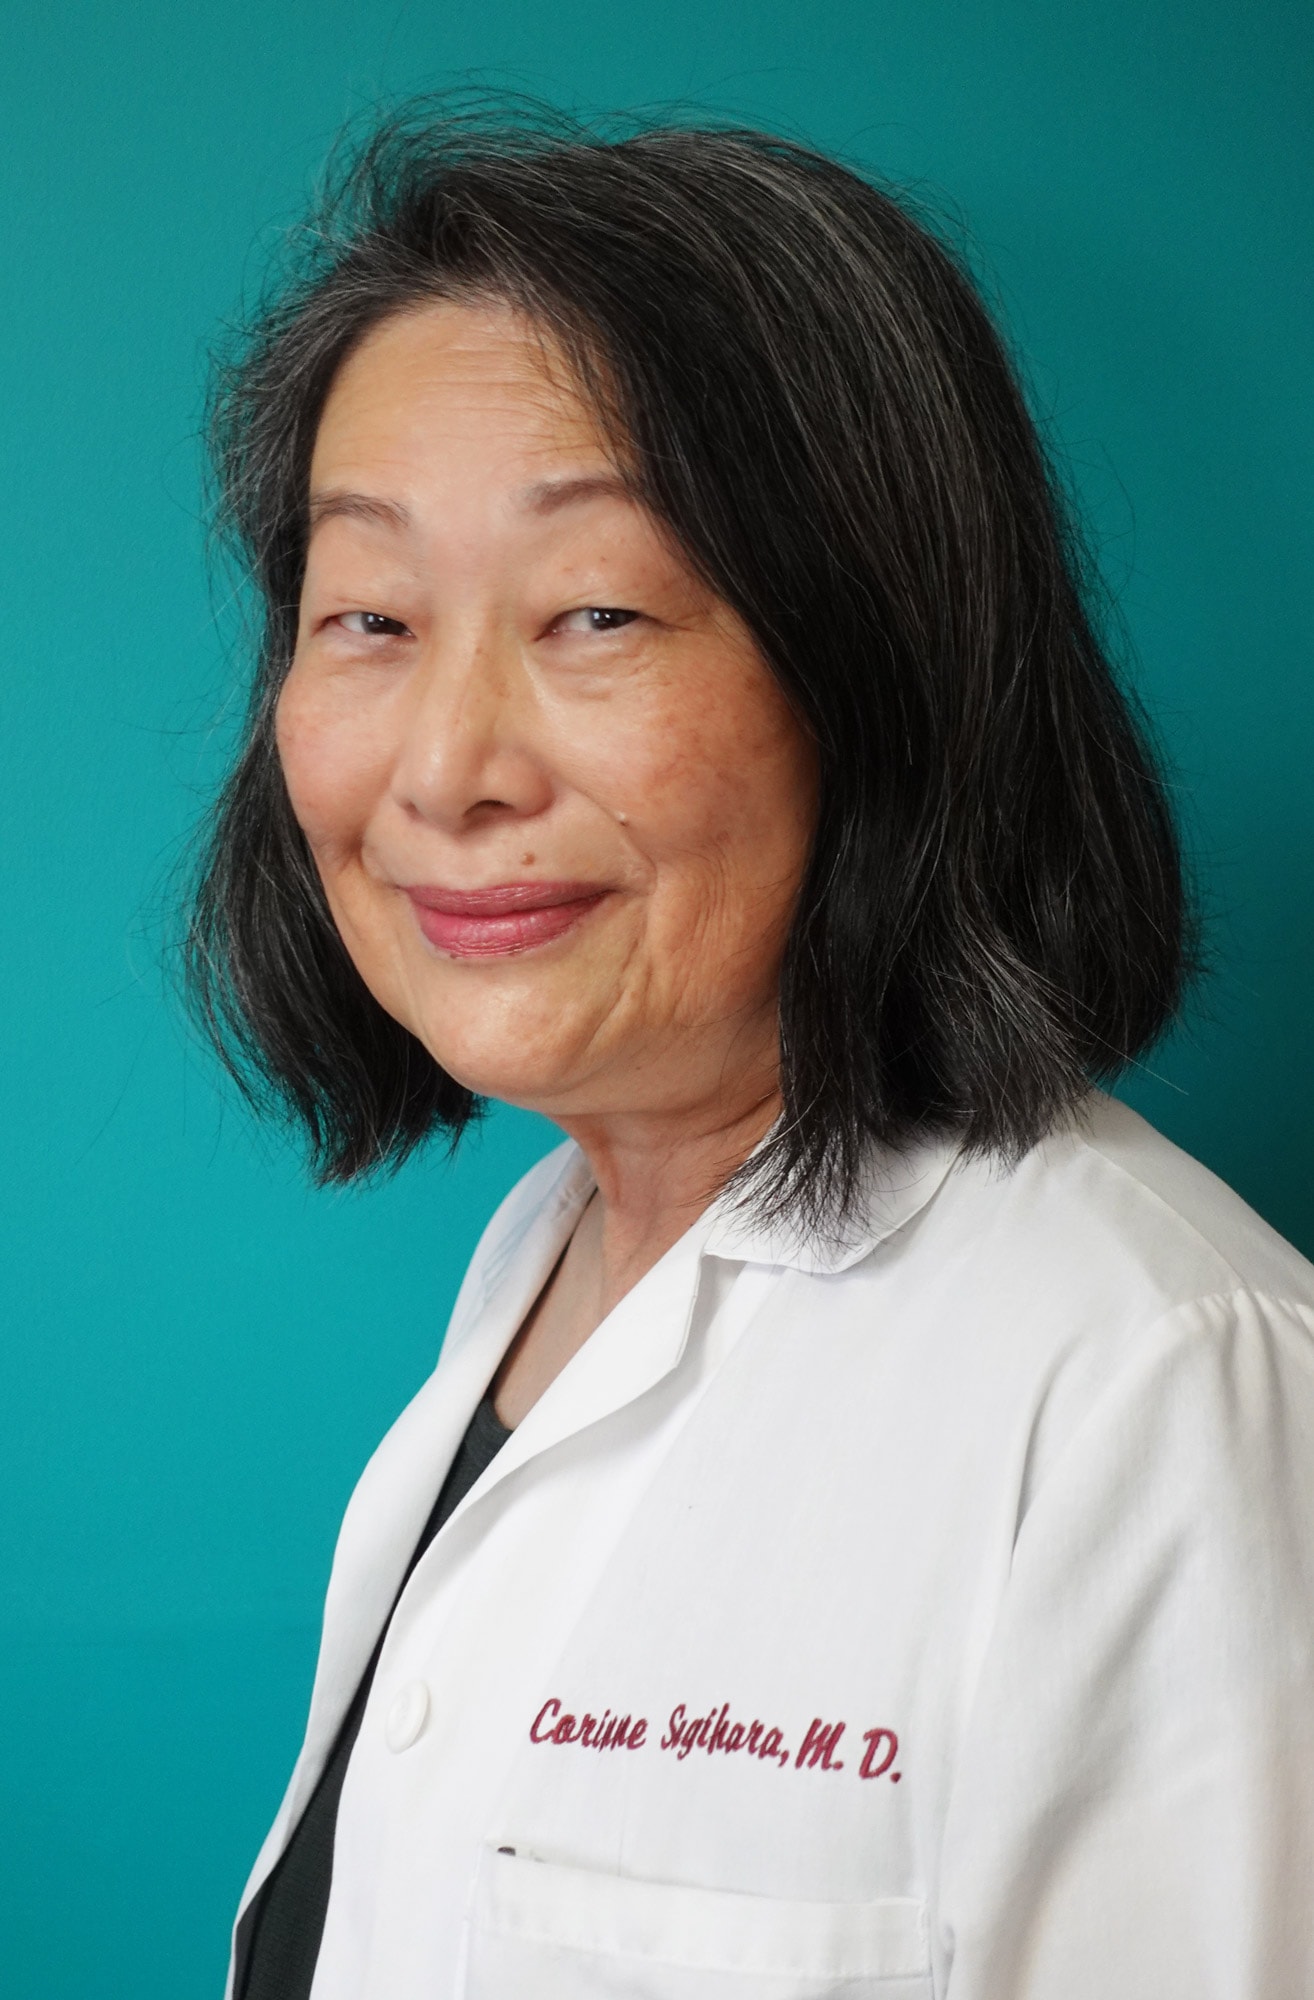 Casa Esthetica Founder and GYN specialist, Dr. Corinne Sugihara, M.D.